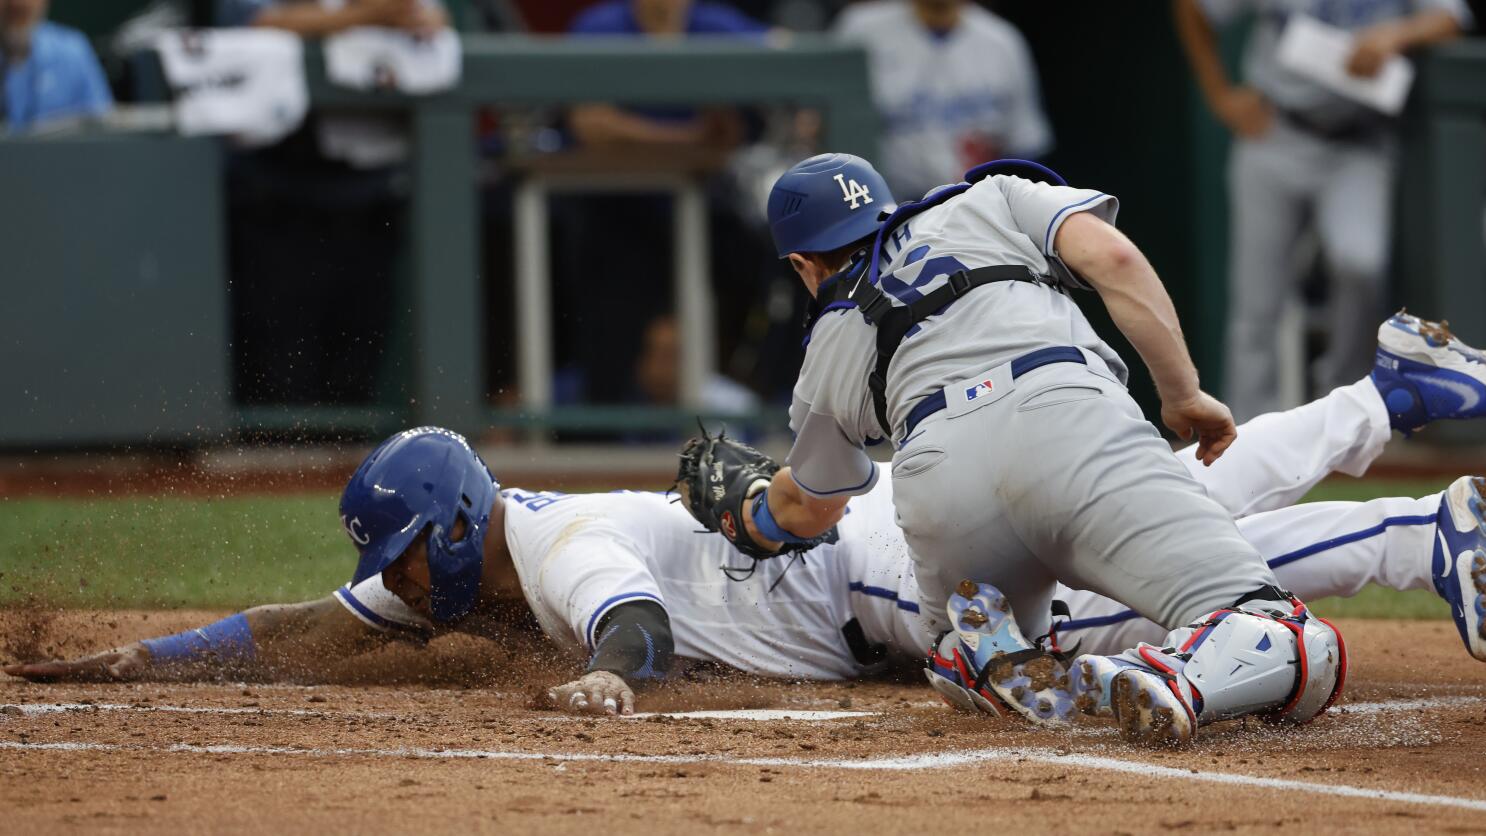 Dodgers can't complete comeback against Braves in series opener